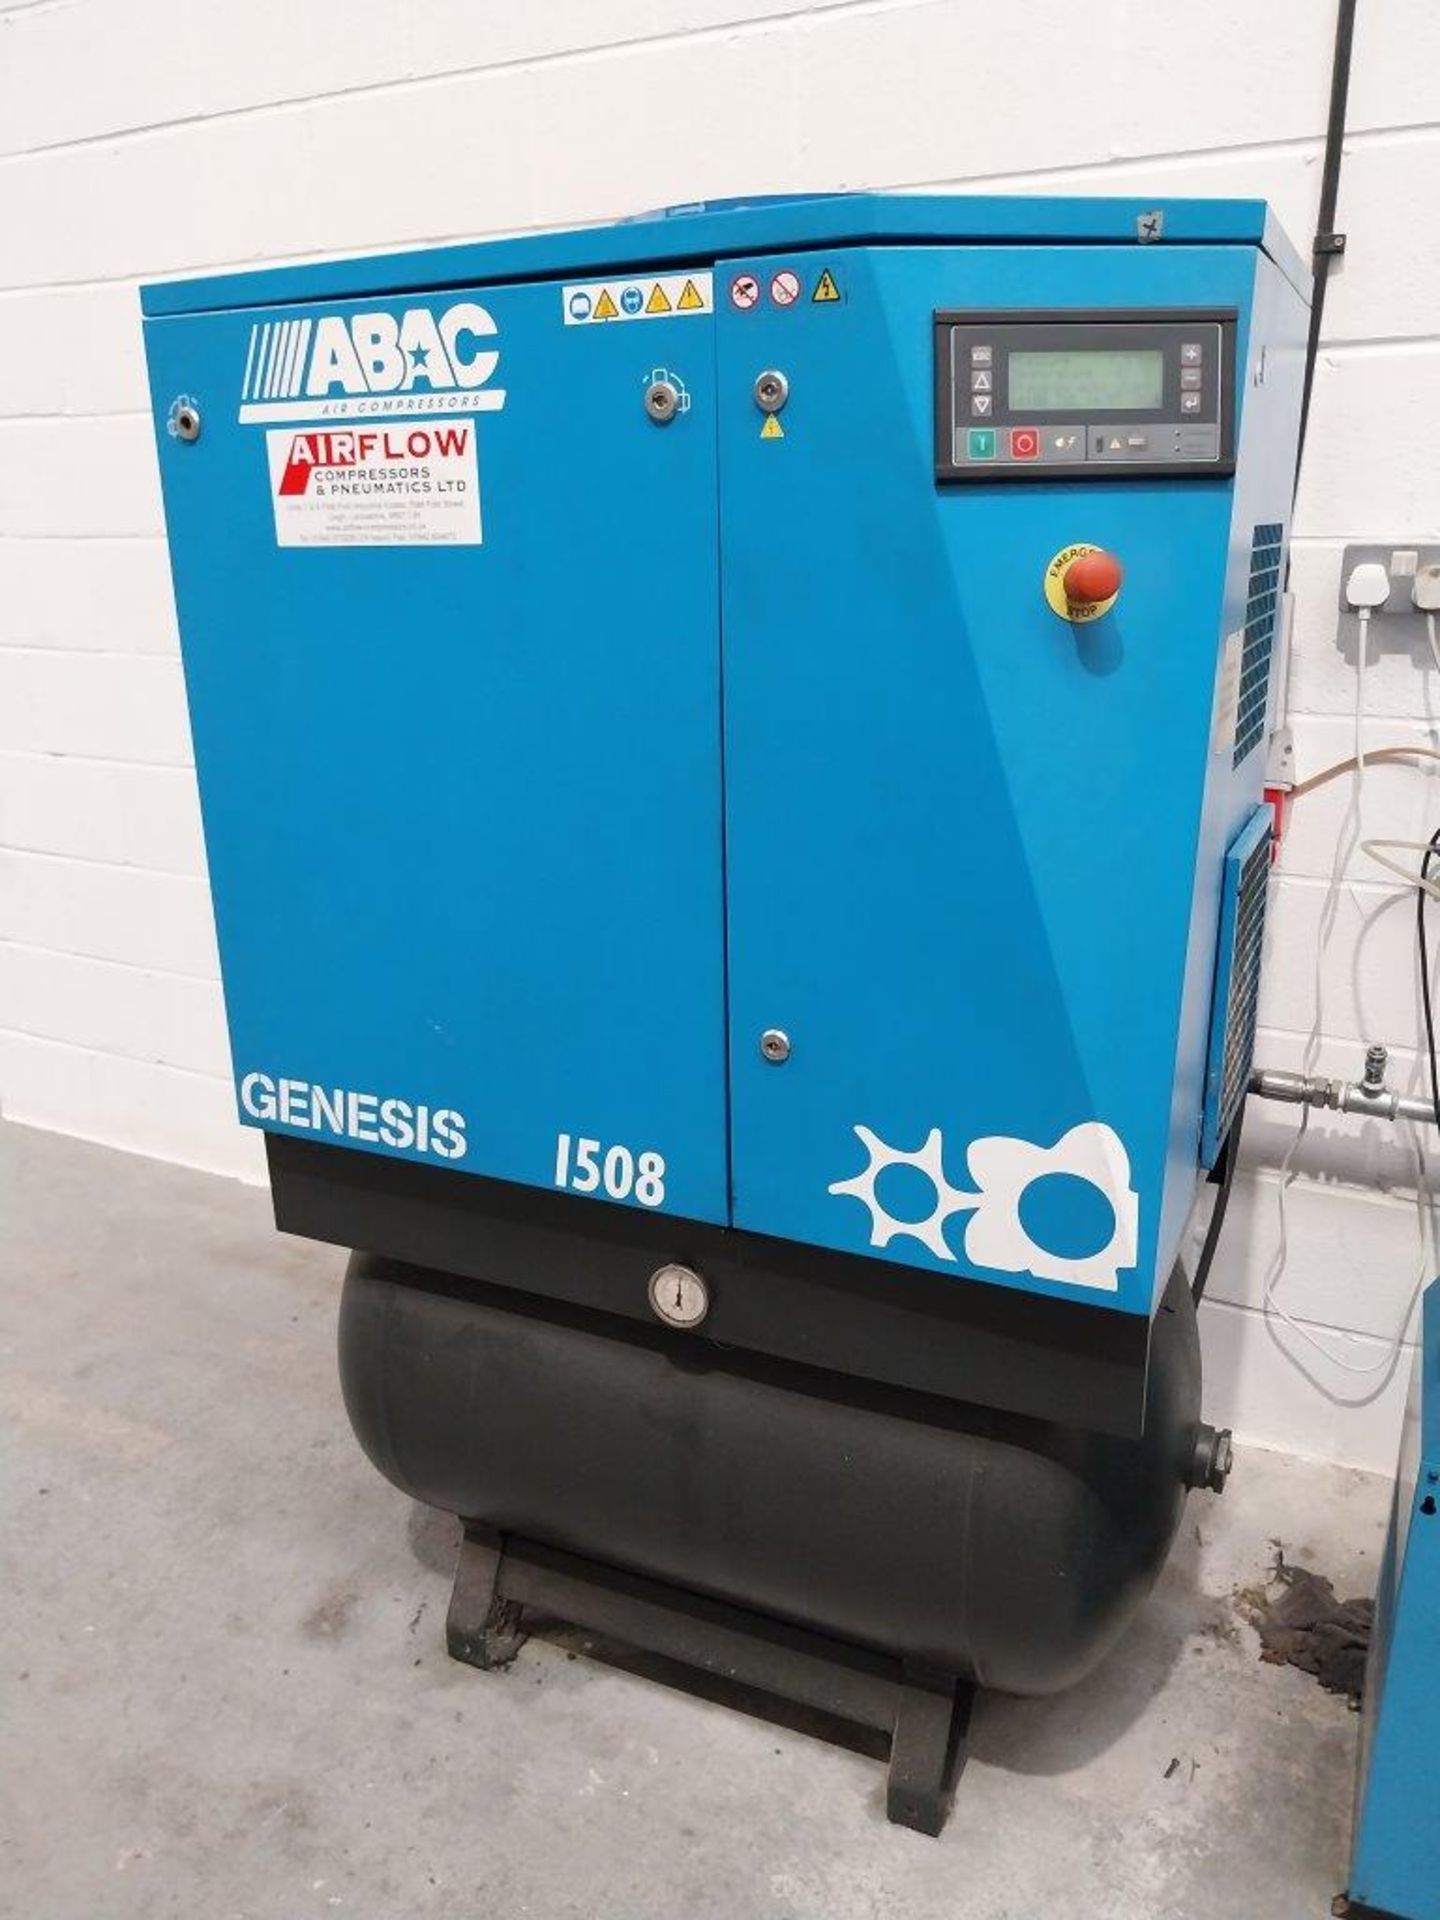 ABAC Genesis 1508 8 bar screw compressor Serial number ITR0108981, free air delivery 2.32m³ / min